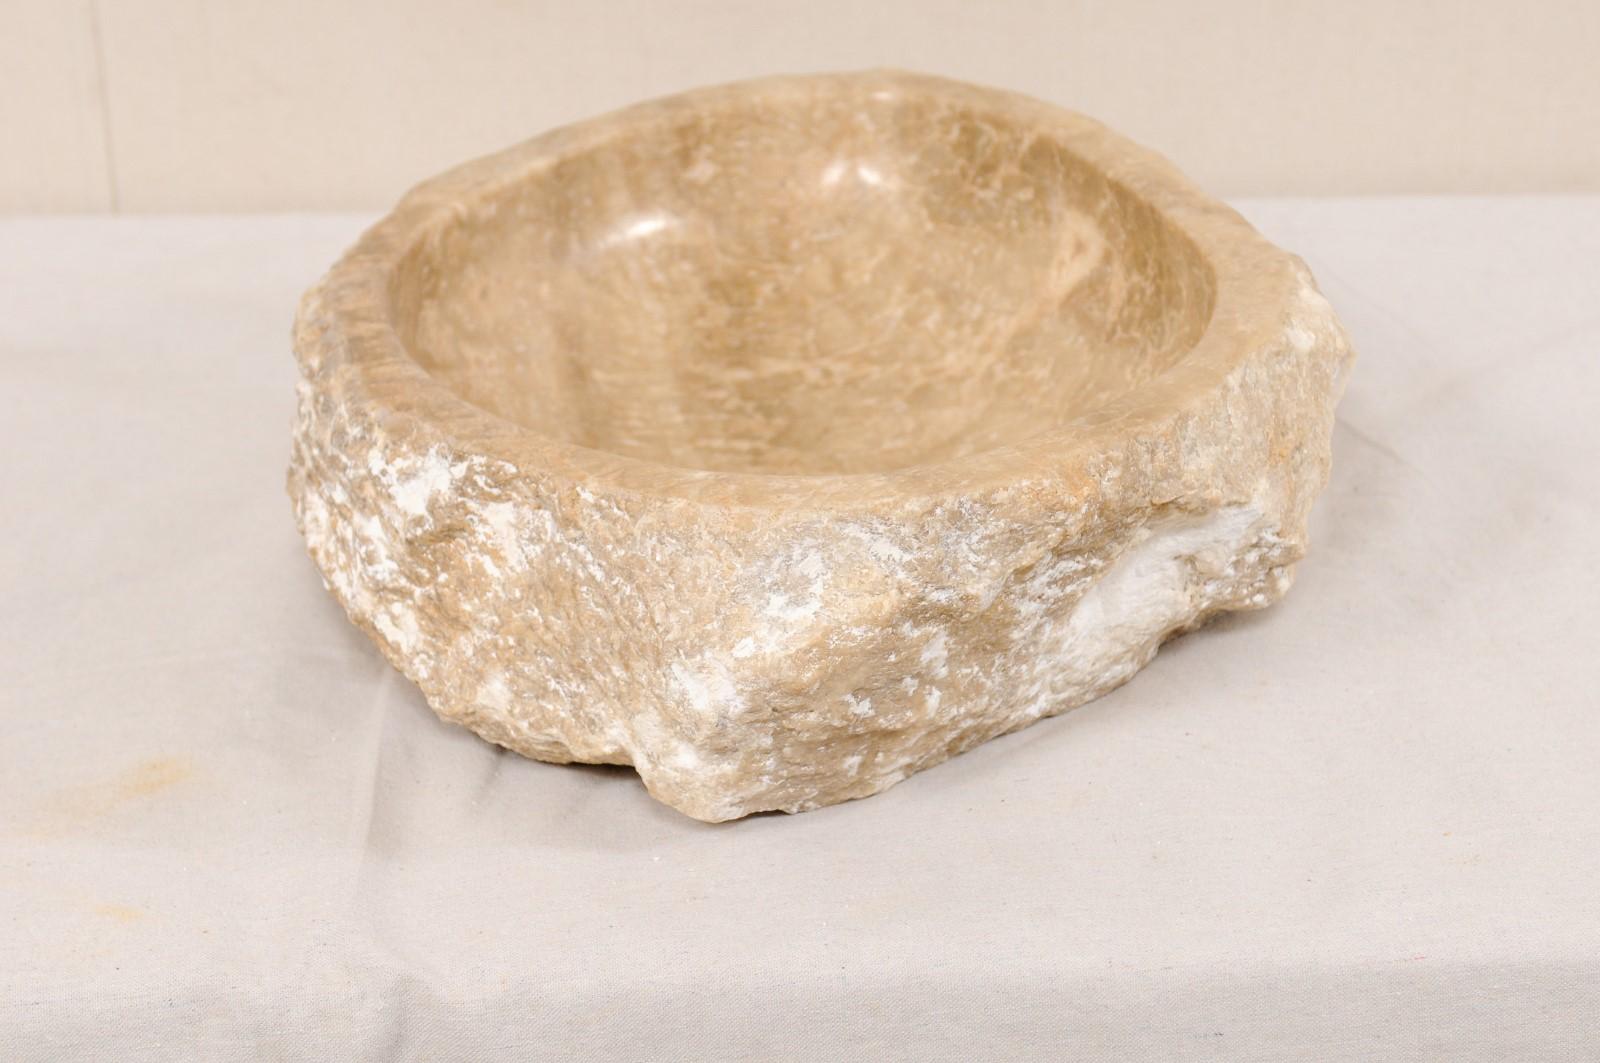 Carved Beautiful Polished Onyx Rock Sink Basin in Neutral Cream and Brown Hues